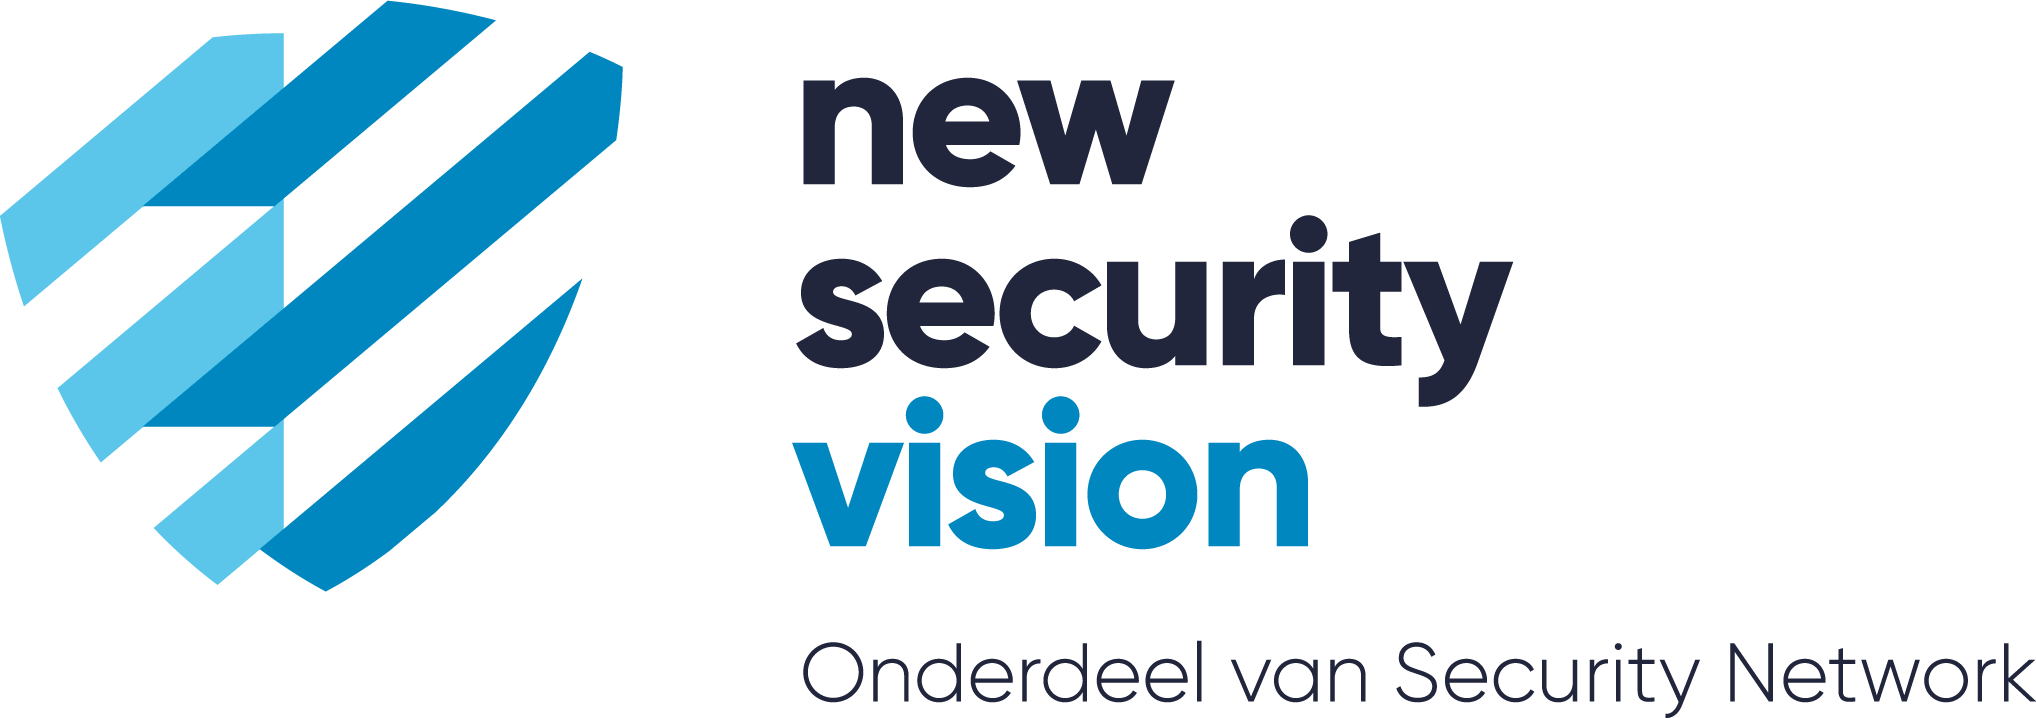 New Security Vision